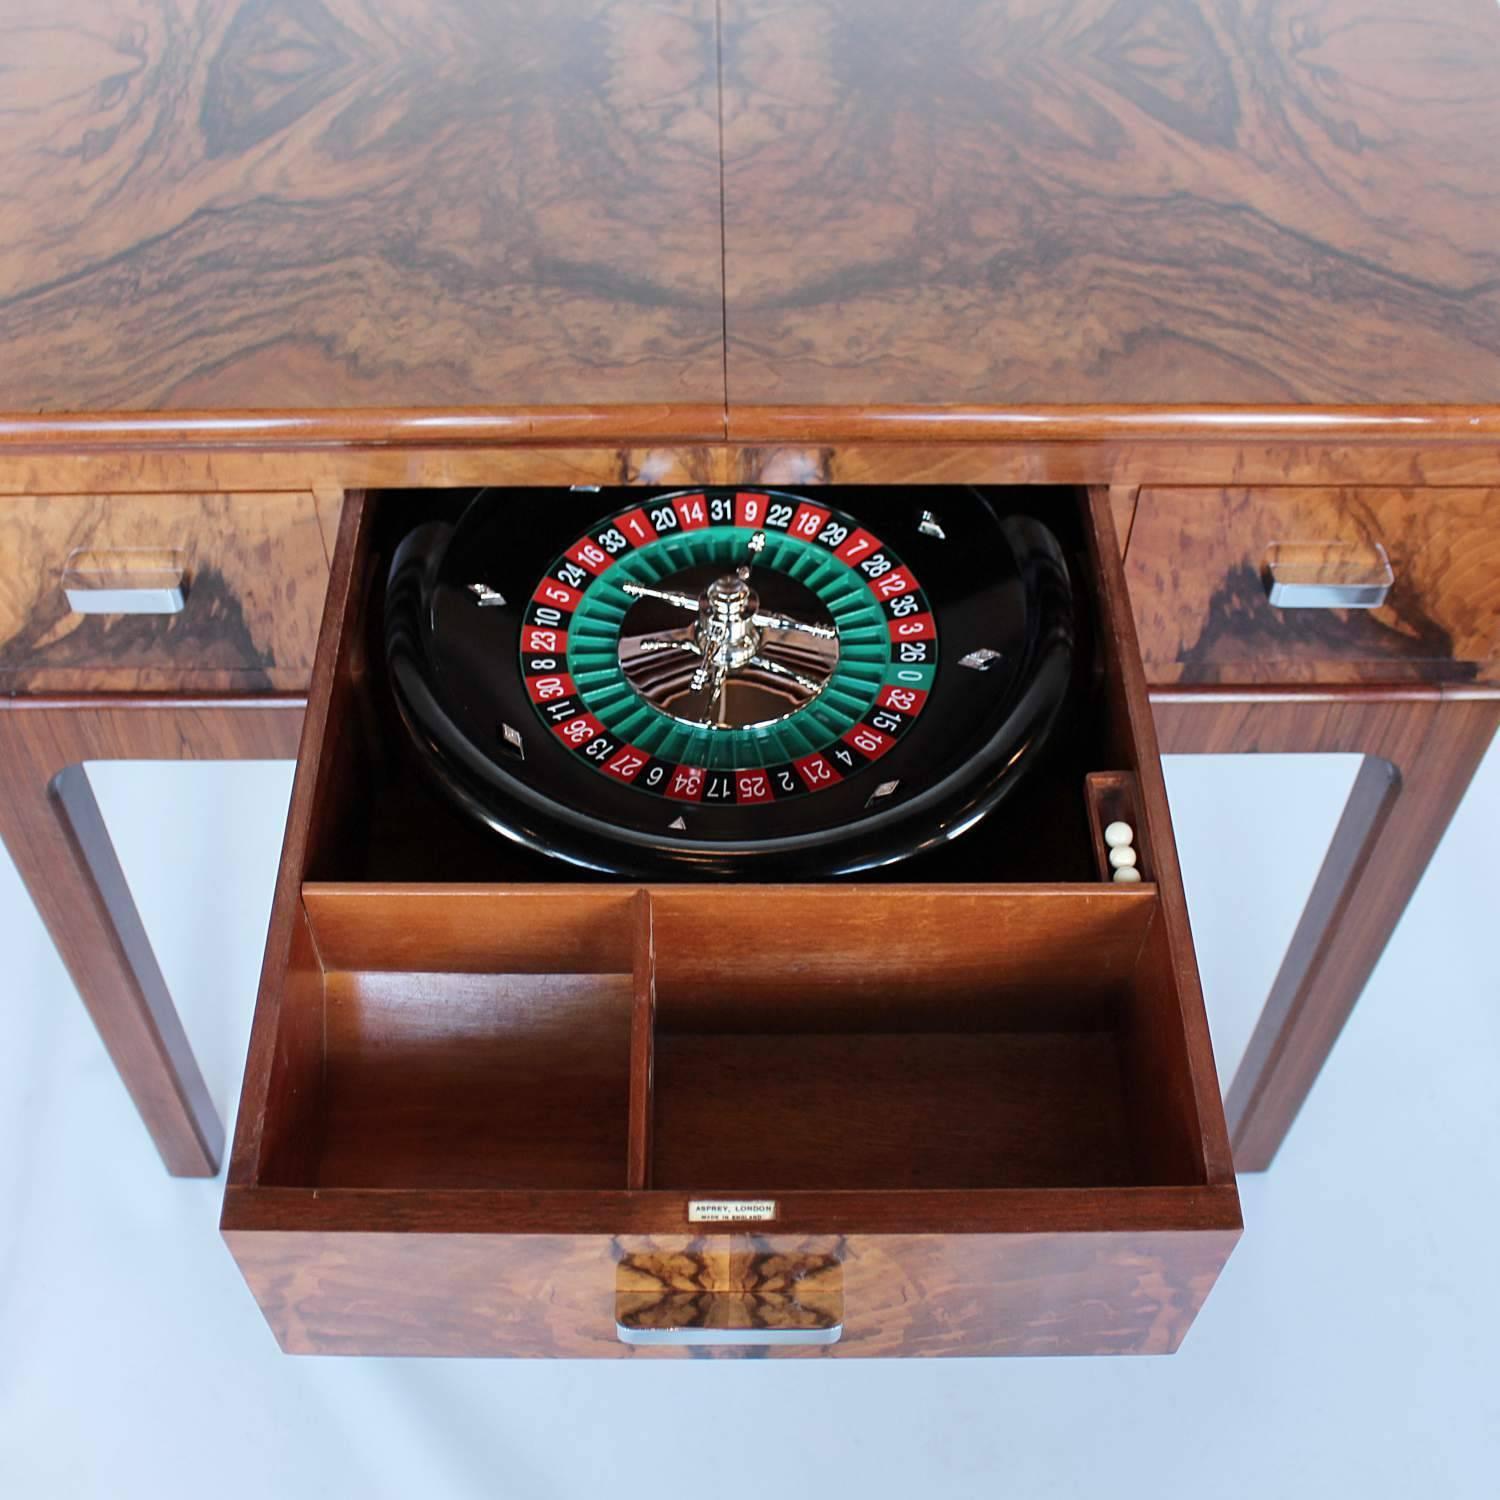 An Art Deco gaming table by Asprey of London.

Figured walnut throughout with straight grain walnut banding. Opens over integral, baize covered slides to full gaming table. Includes original chemin de for and gaming chips. Later roulette wheel.